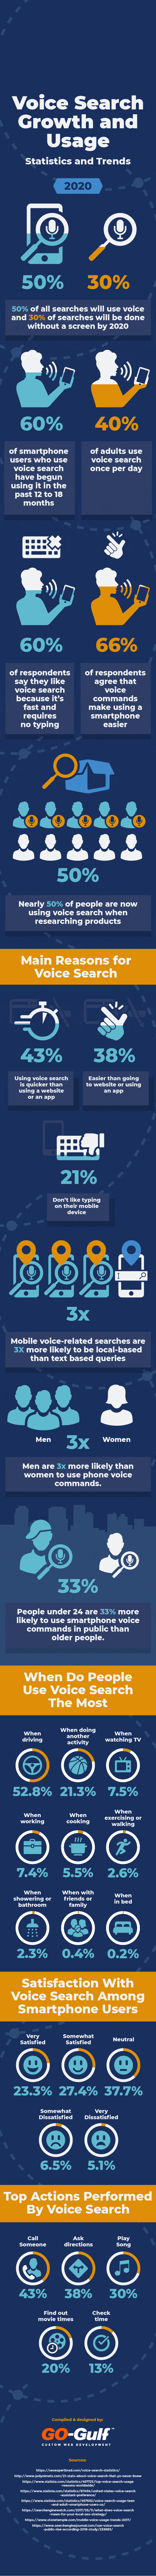  Voice Search Statistics You Need To Help You Take Advantage